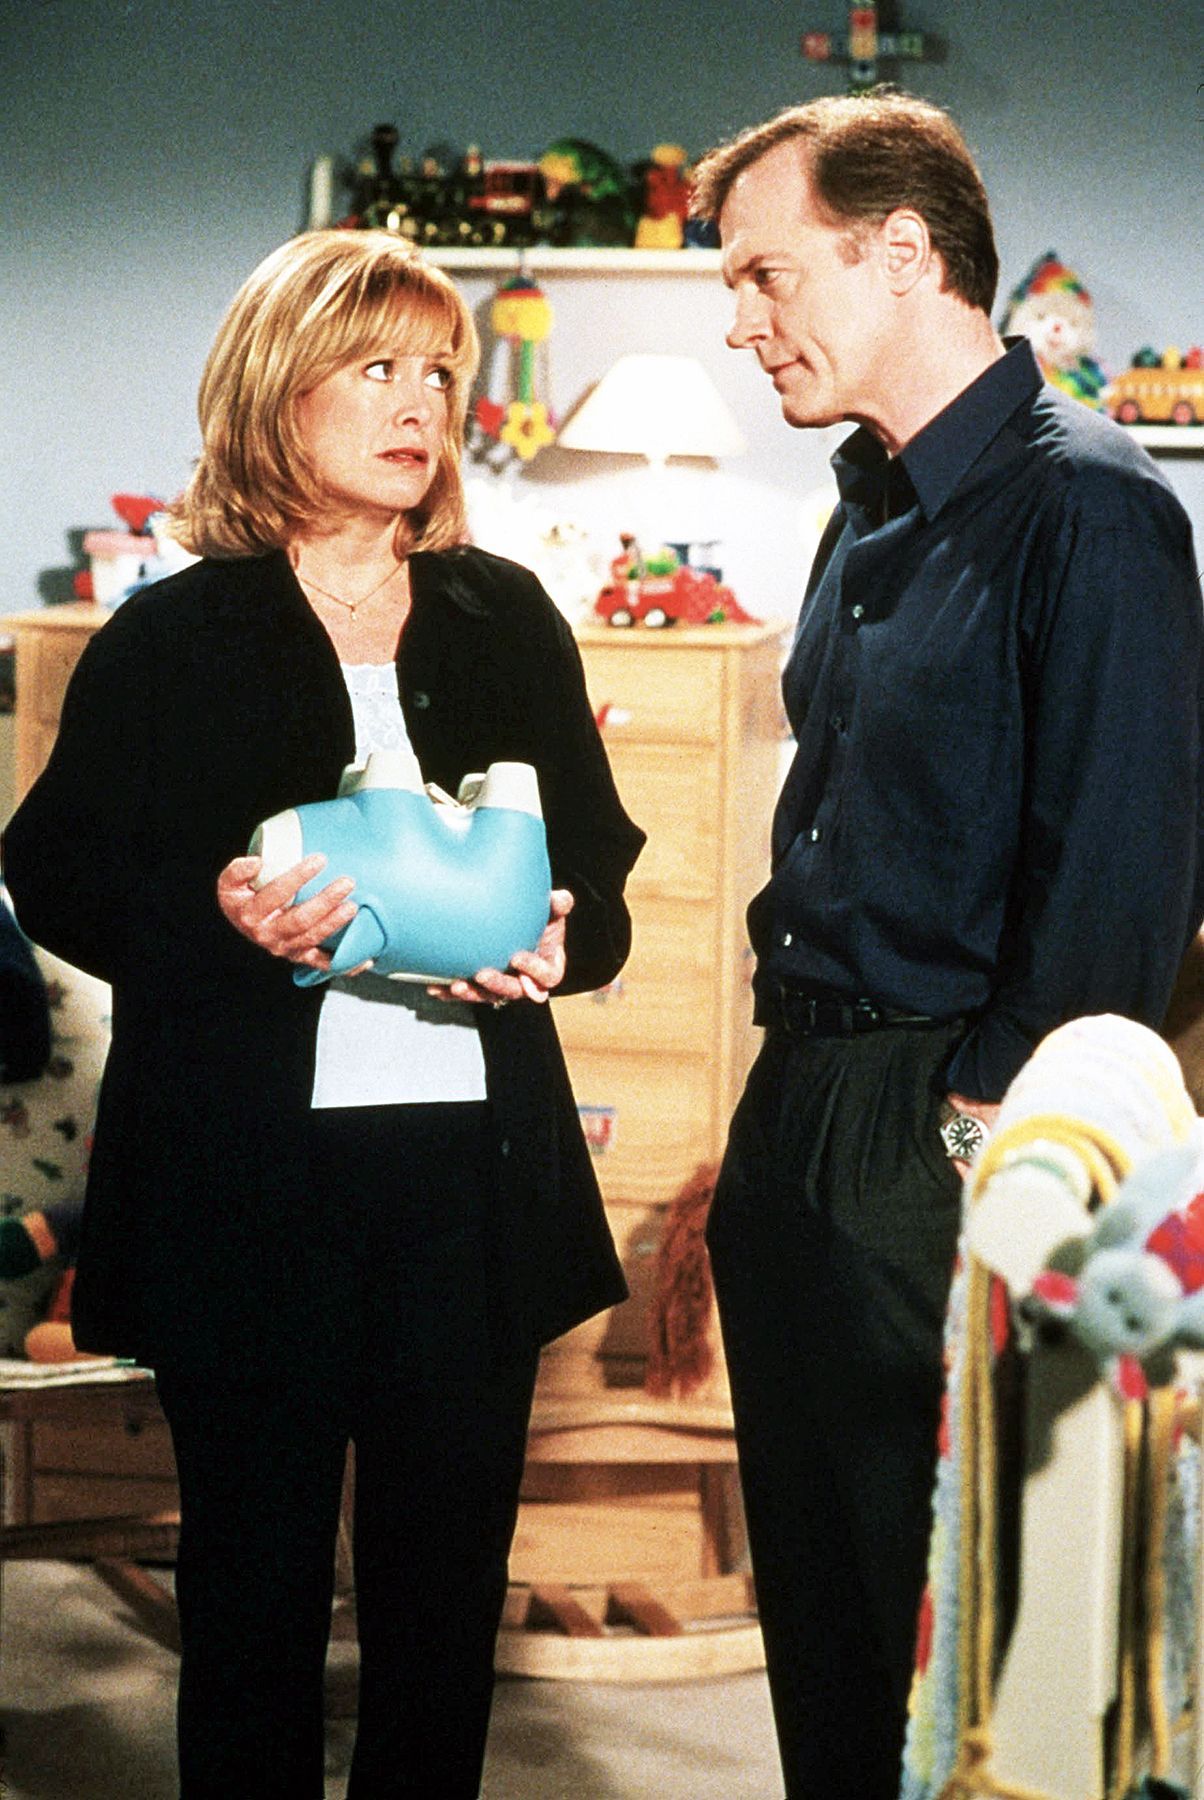 Catherine Hicks: I'll Do '7th Heaven' Reunion If Stephen Collins